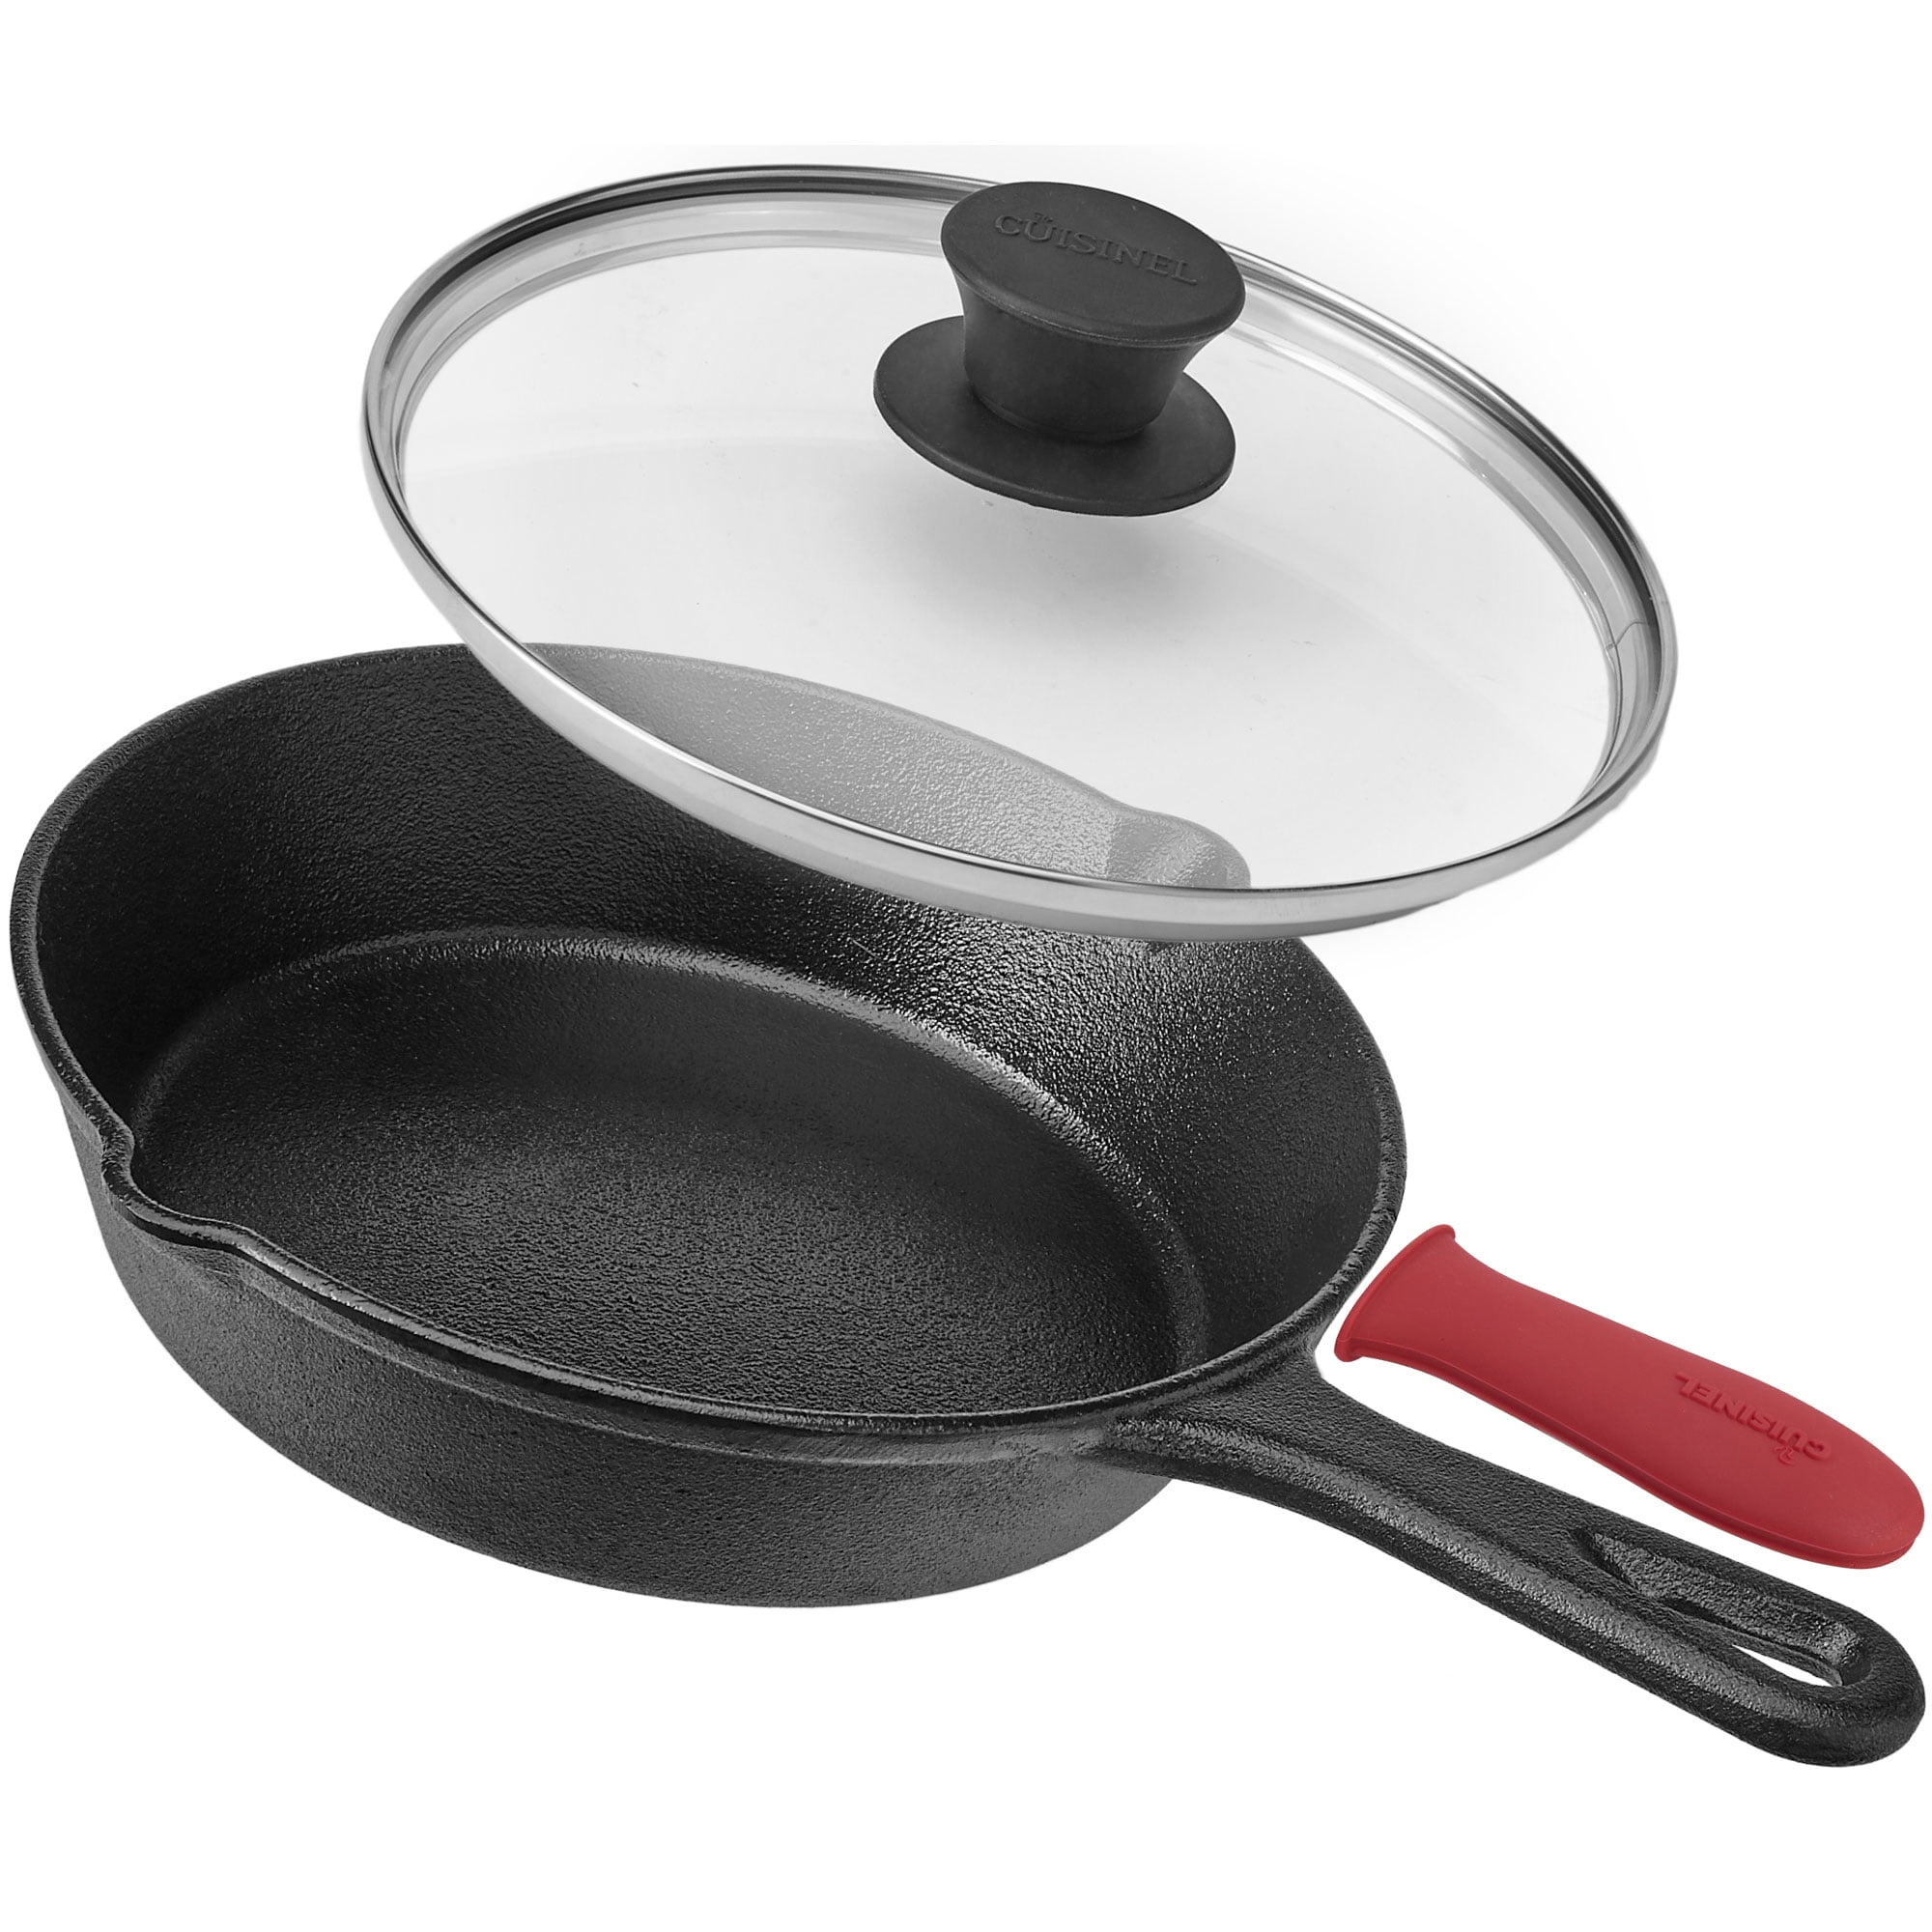 Pre-Seasoned Cast Iron Dual Handle Skillet with Glass Lid - 15